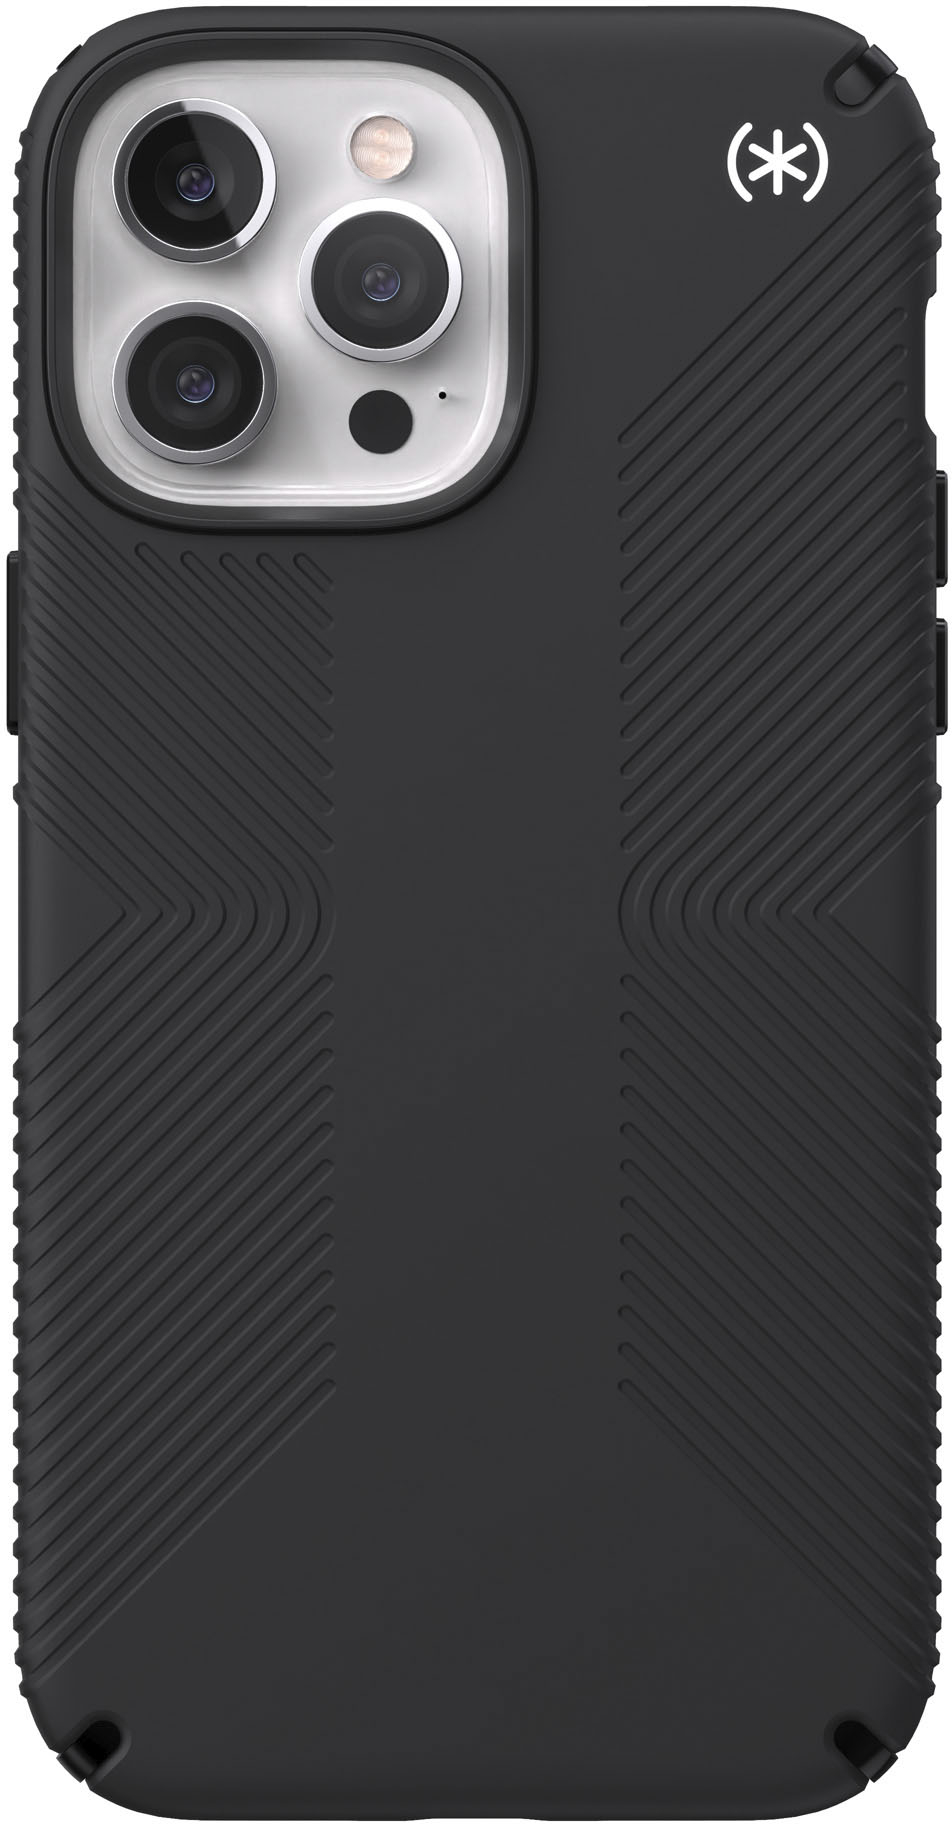 0840168505371 - SPECK - PRESIDIO2 GRIP HARD SHELL CASE FOR IPHONE 13 PRO MAX & IPHONE 12 PRO MAX - BLACK